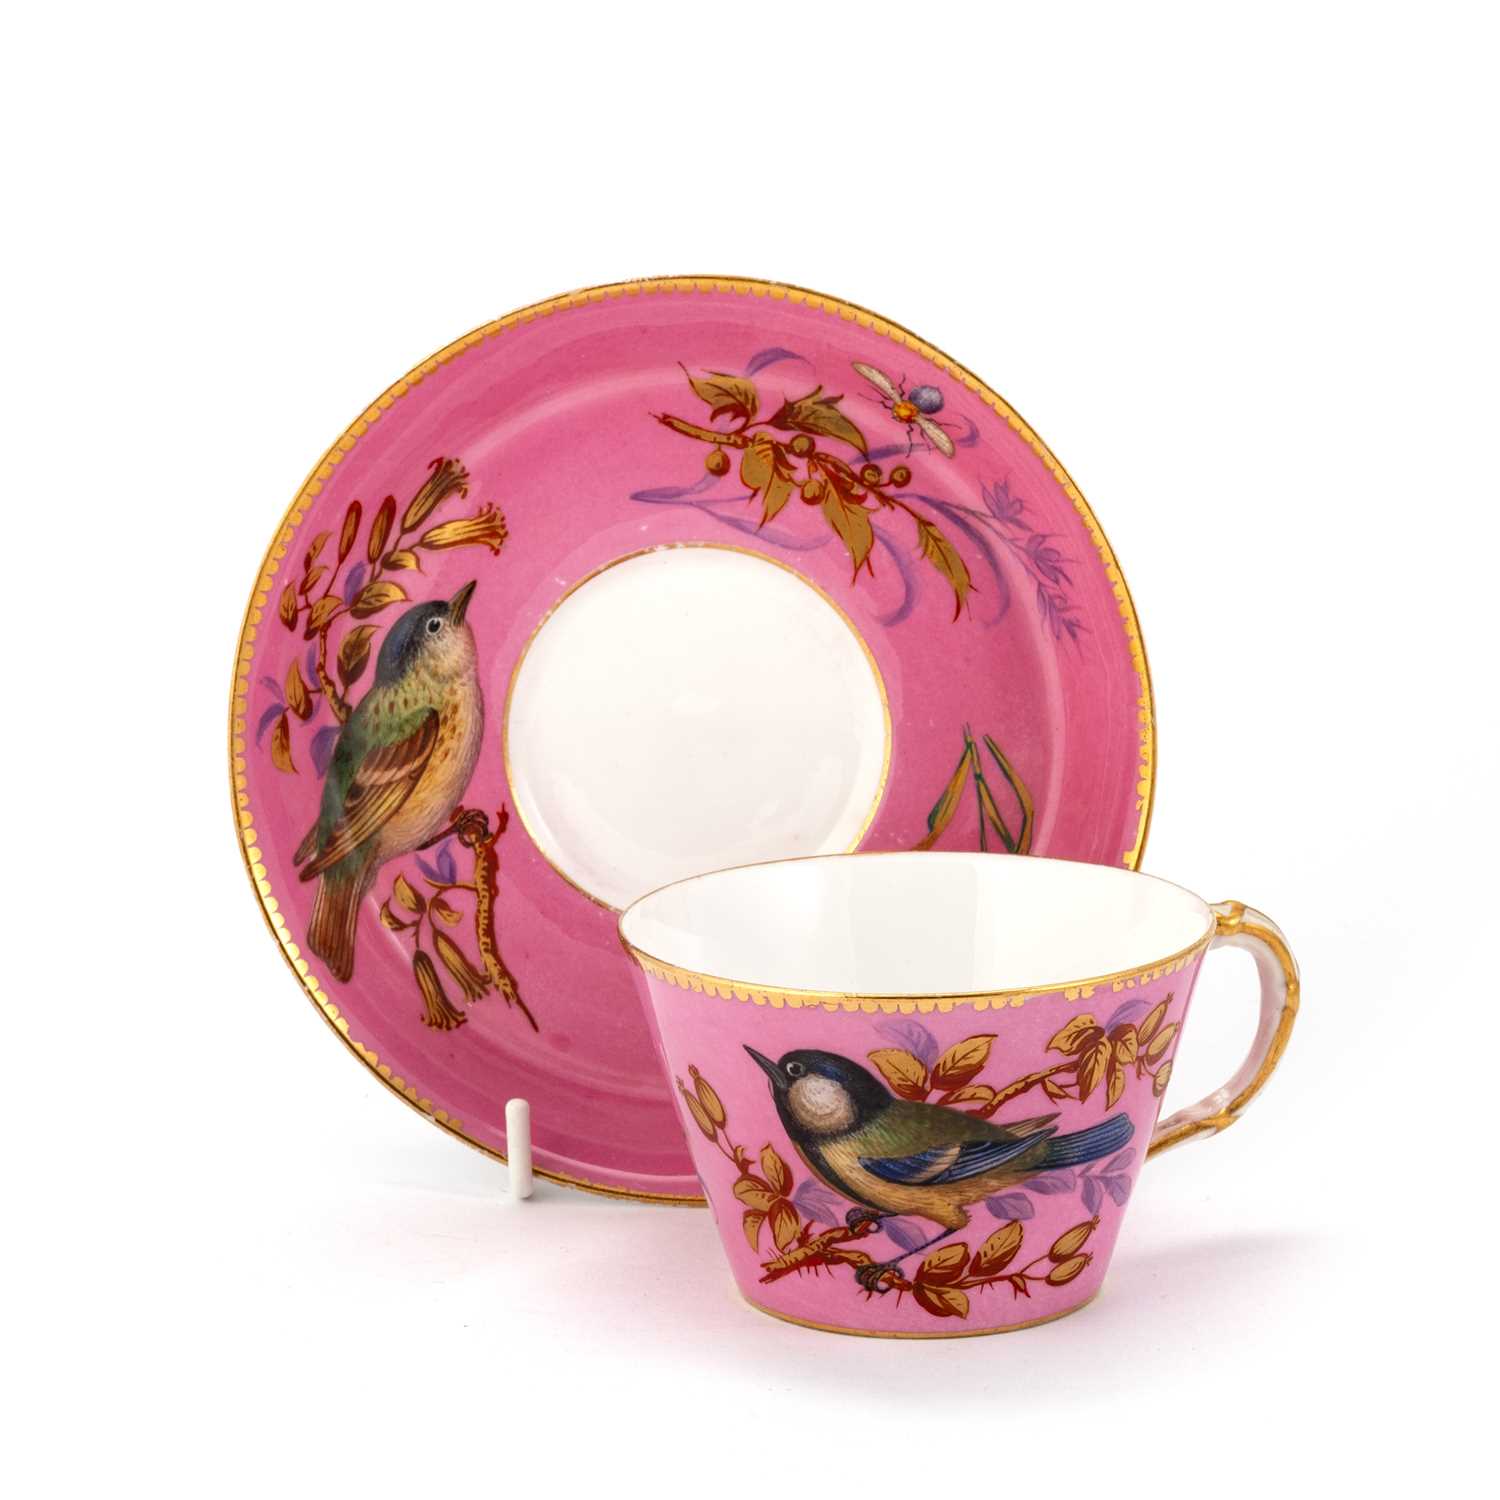 A ROYAL WORCESTER AESTHETIC CUP AND SAUCER, DATE CODES FOR 1876 AND 1877 - Image 2 of 3